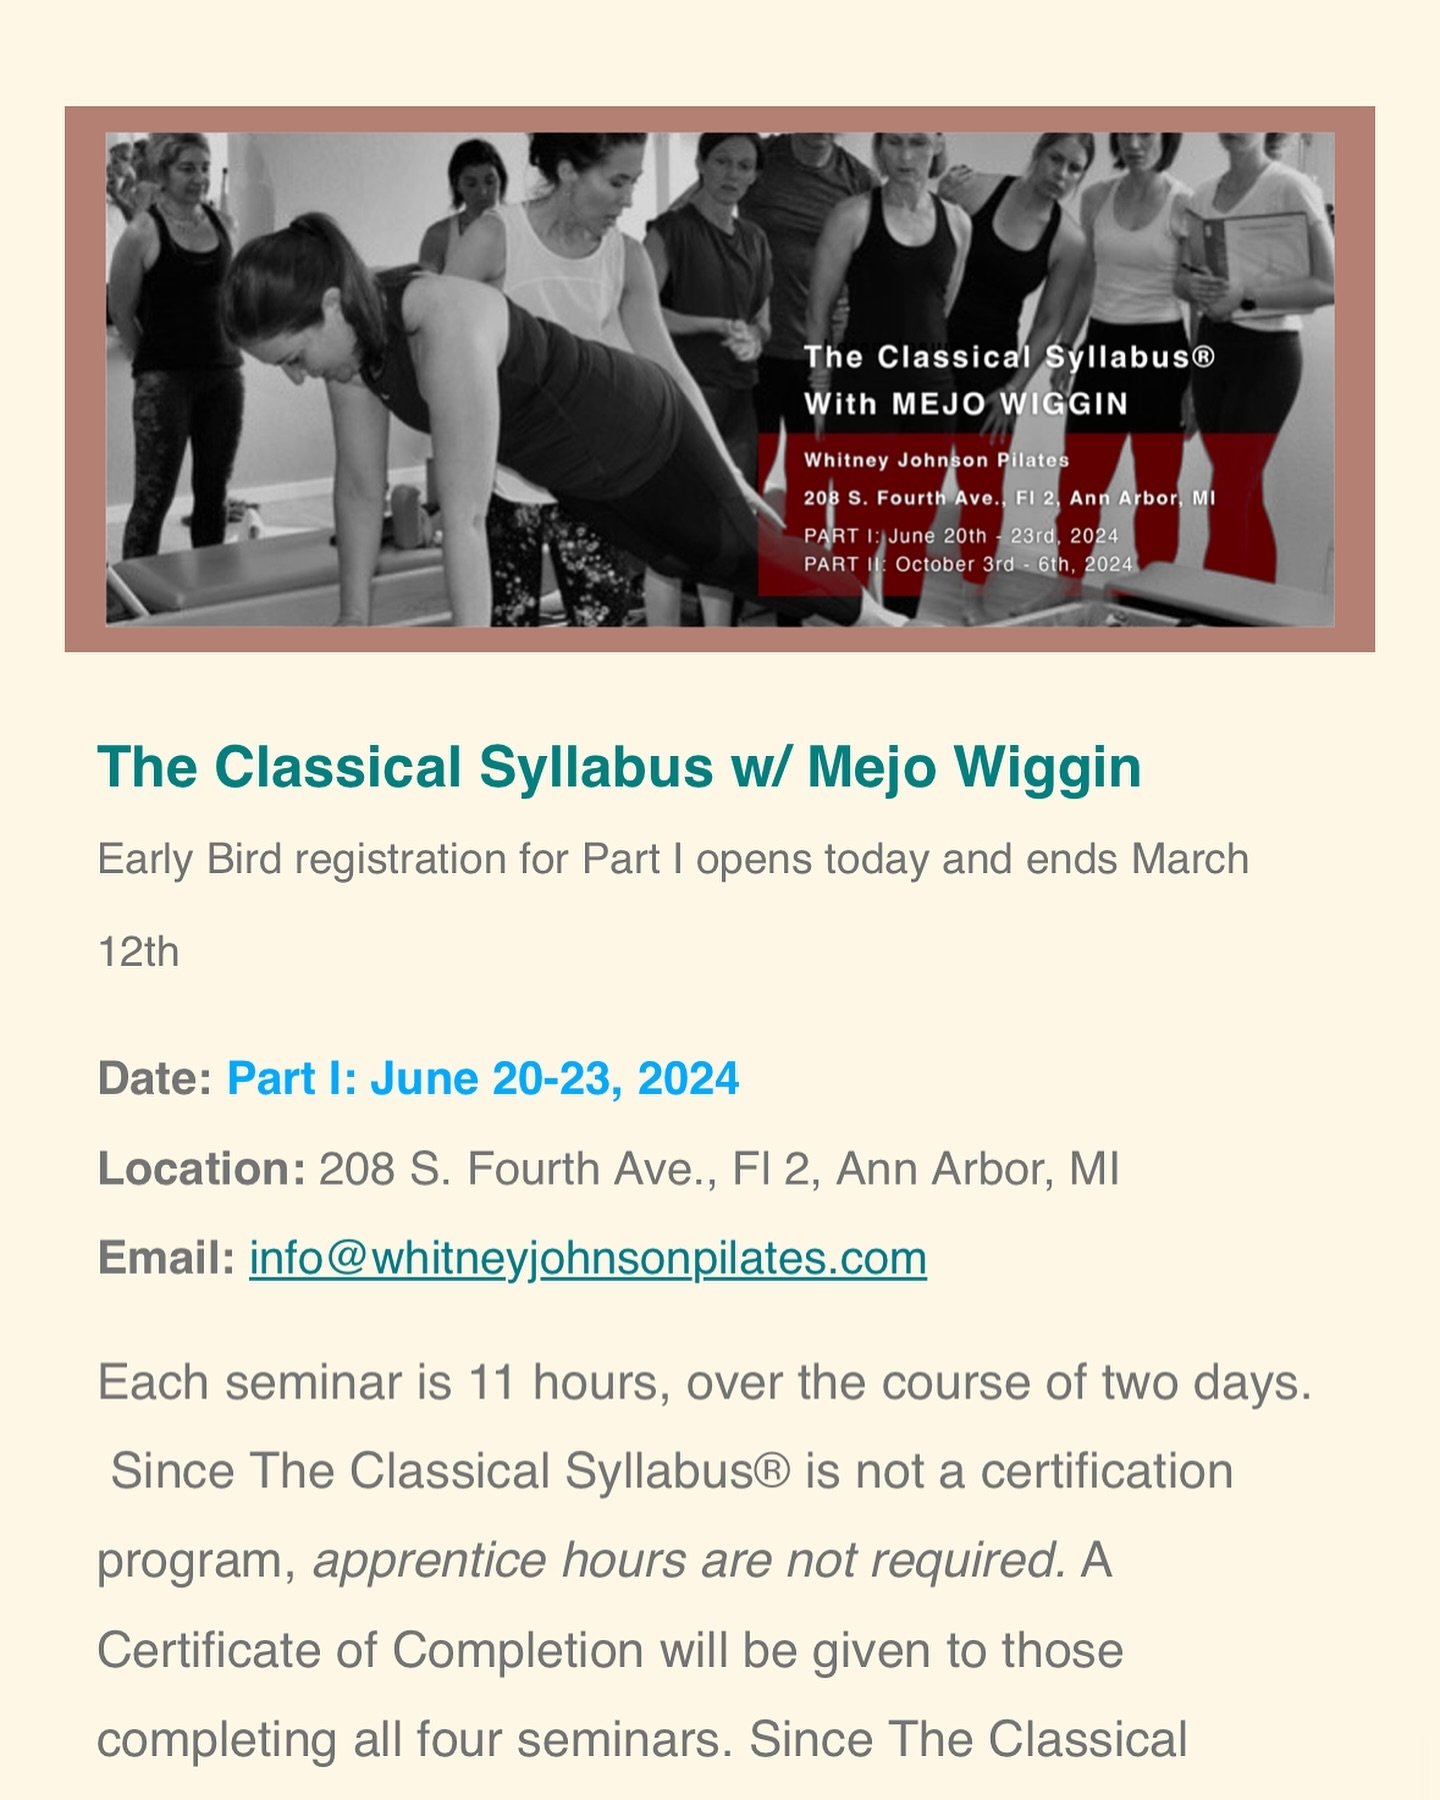 A shoutout to @gratz_pilates for featuring our upcoming workshop series with @mejowigginpilates in their most recent newsletter 👏 

Hope to see you at the Classical Syllabus! If you haven&rsquo;t snagged your spot yet, send me an email at info@whitn